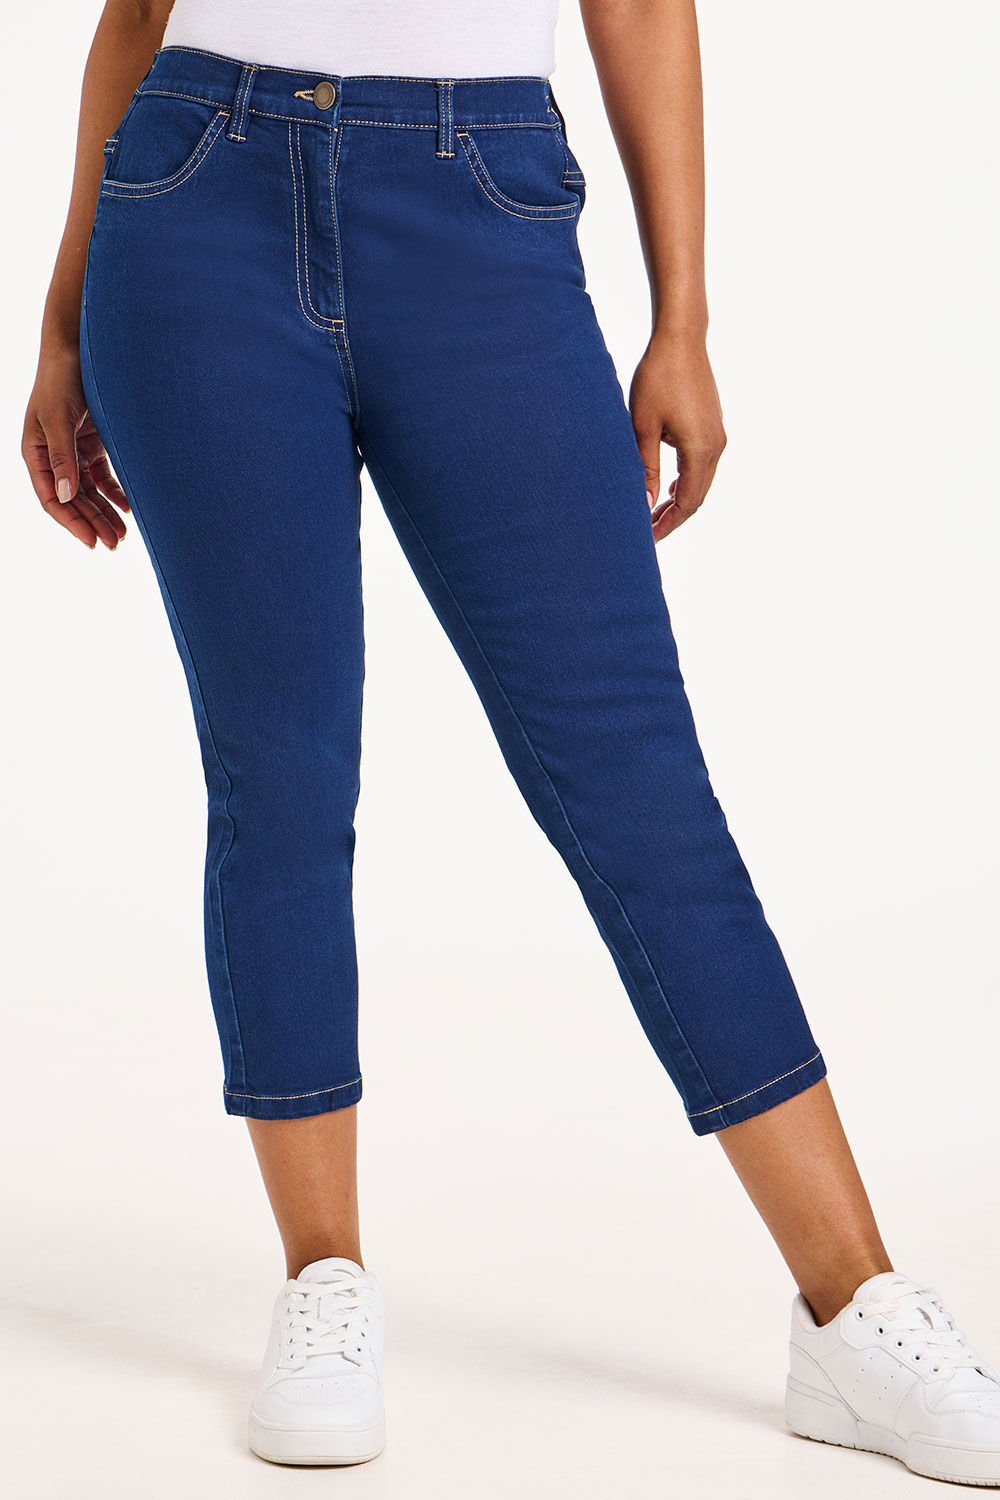 Bonmarche Ink/Denim The Sara Coloured Cropped Jeans, Size: 26